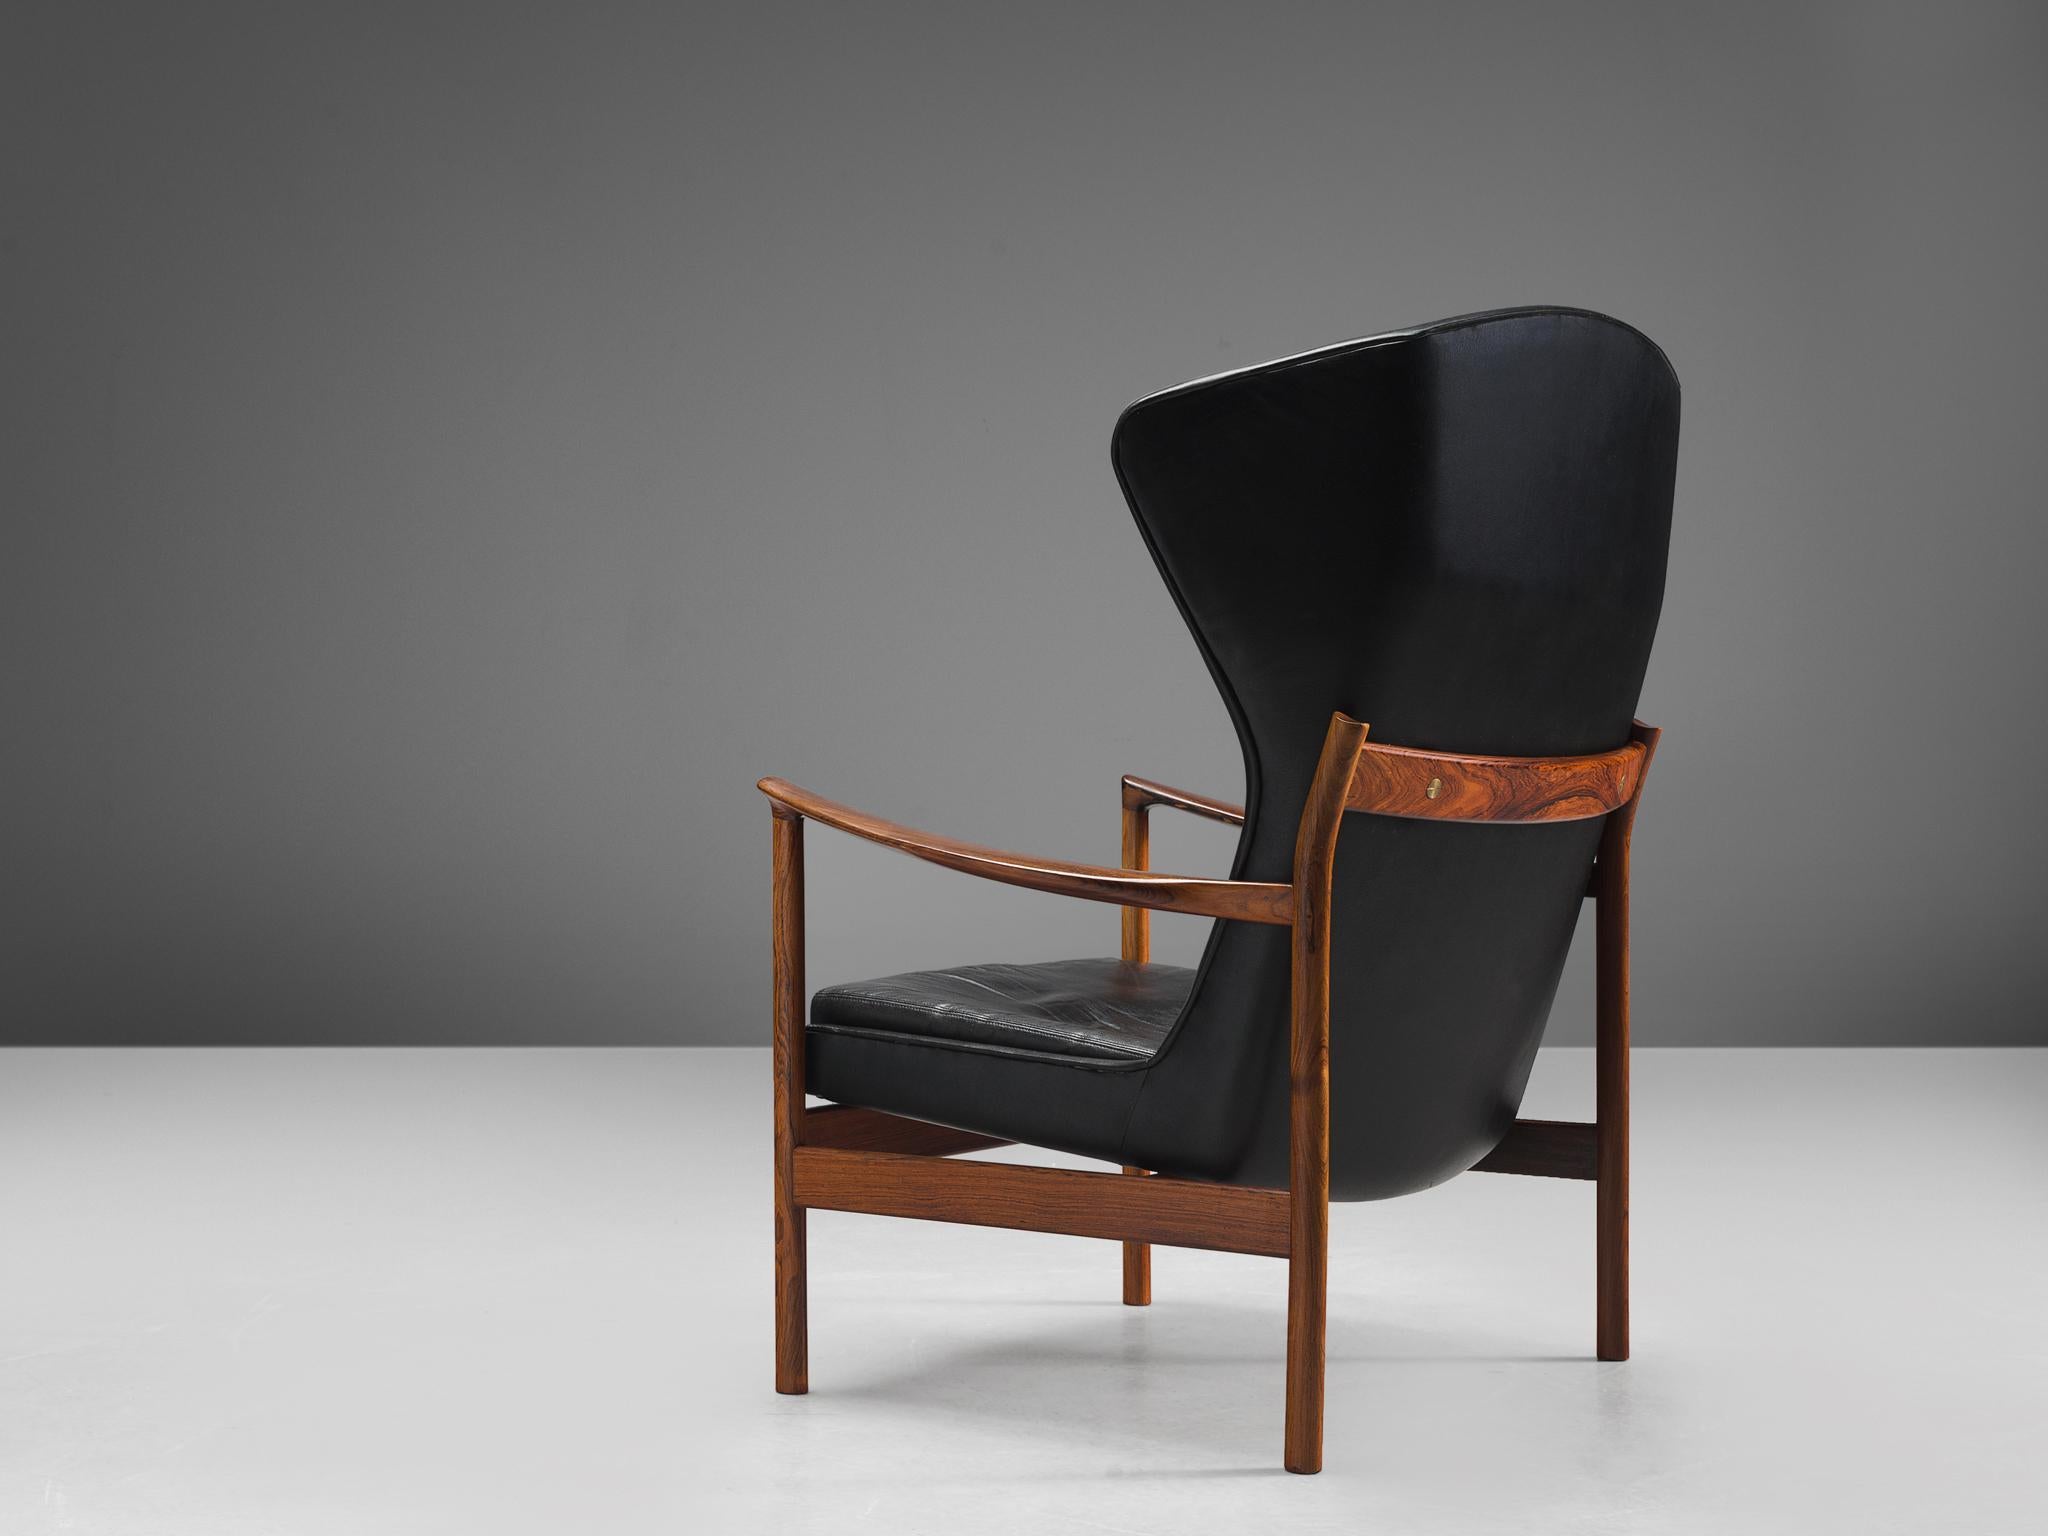 Danish cabinetmaker, wingback easy chair, rosewood frame, black leather, Denmark, 1960s.

This sculptural wingback easy chair is made with a rosewood frame and have brass fittings. The seat has a black upholstered shell that floats within the